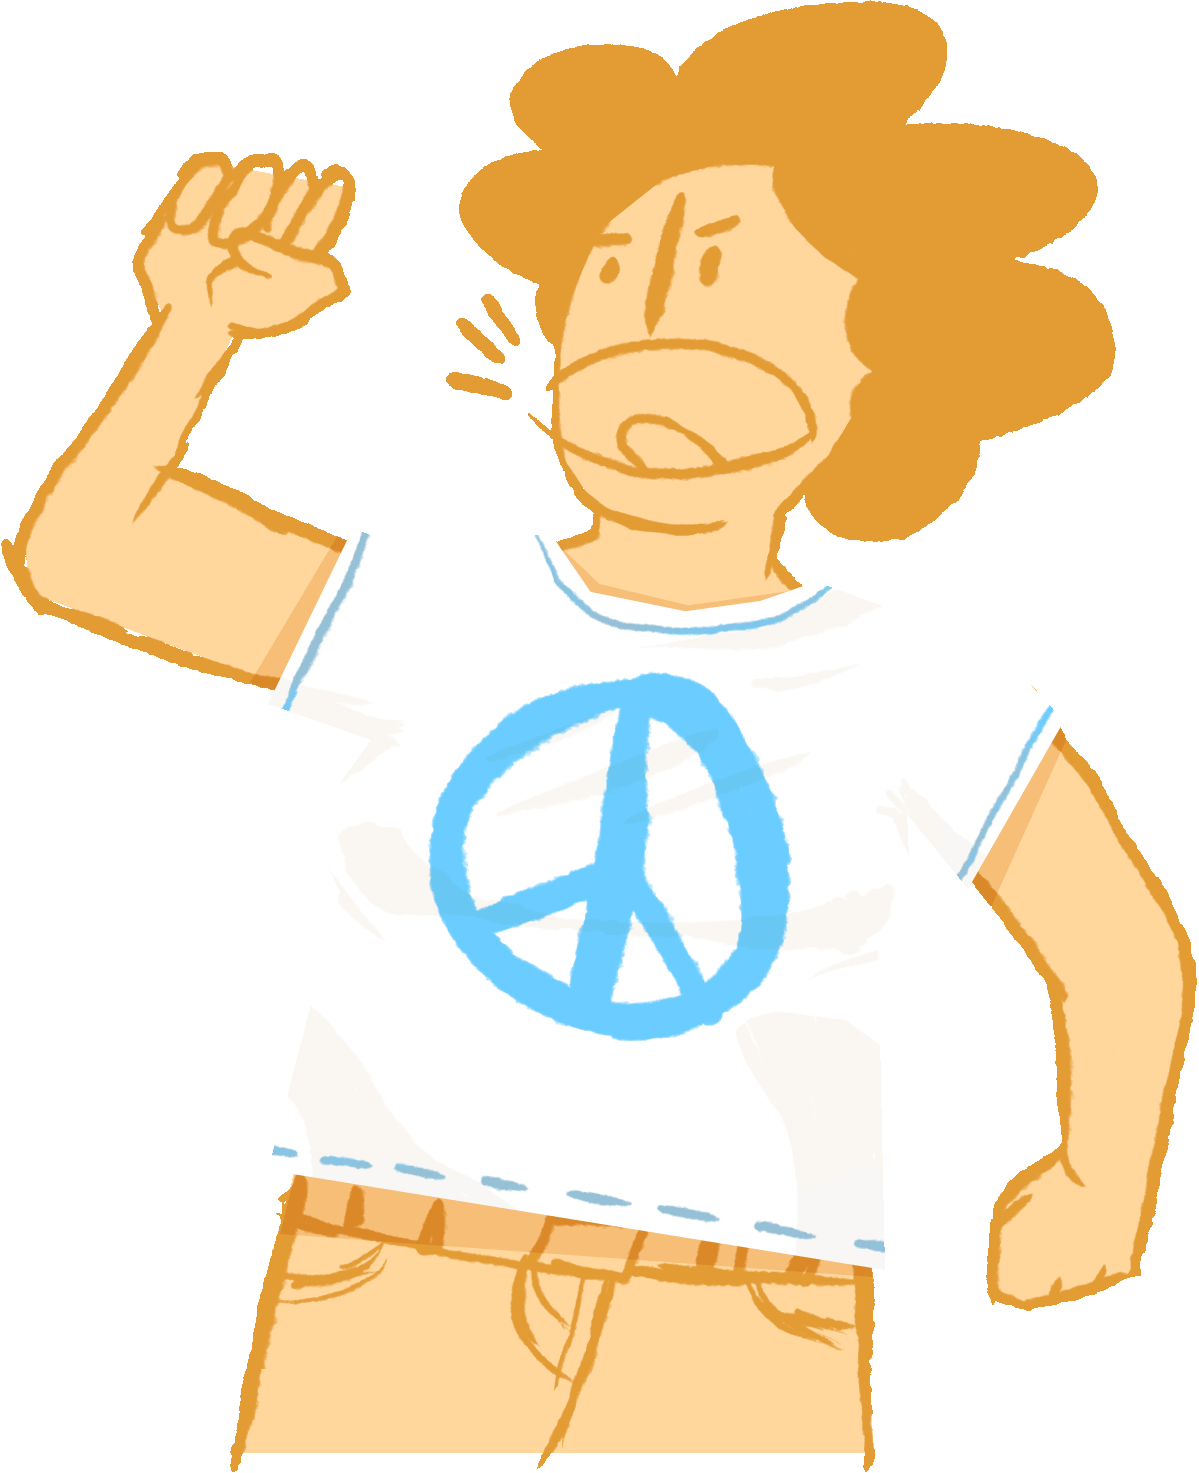 Democracy clipart kid protest. Wear the new american